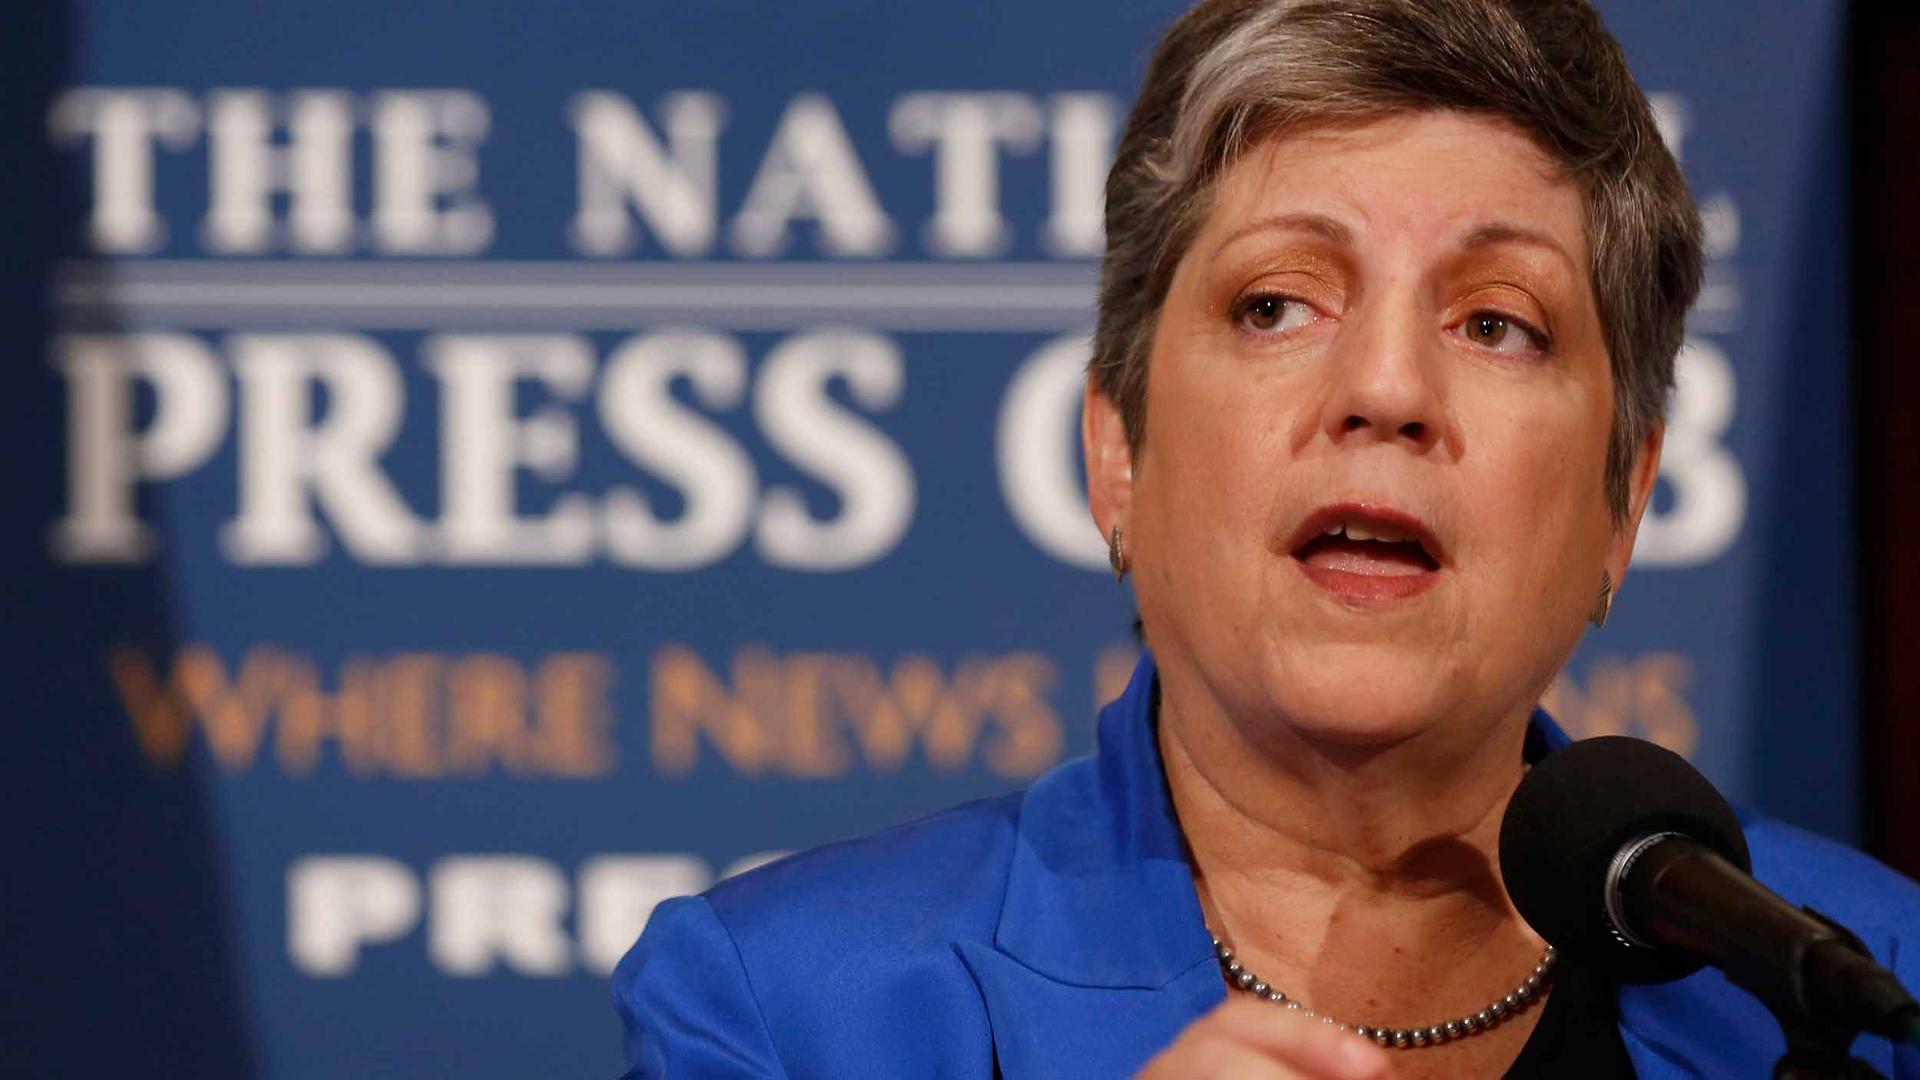 Former US Secretary of Homeland Security Janet Napolitano gives her final official speech at the National Press Club in Washington on August 27, 2013.